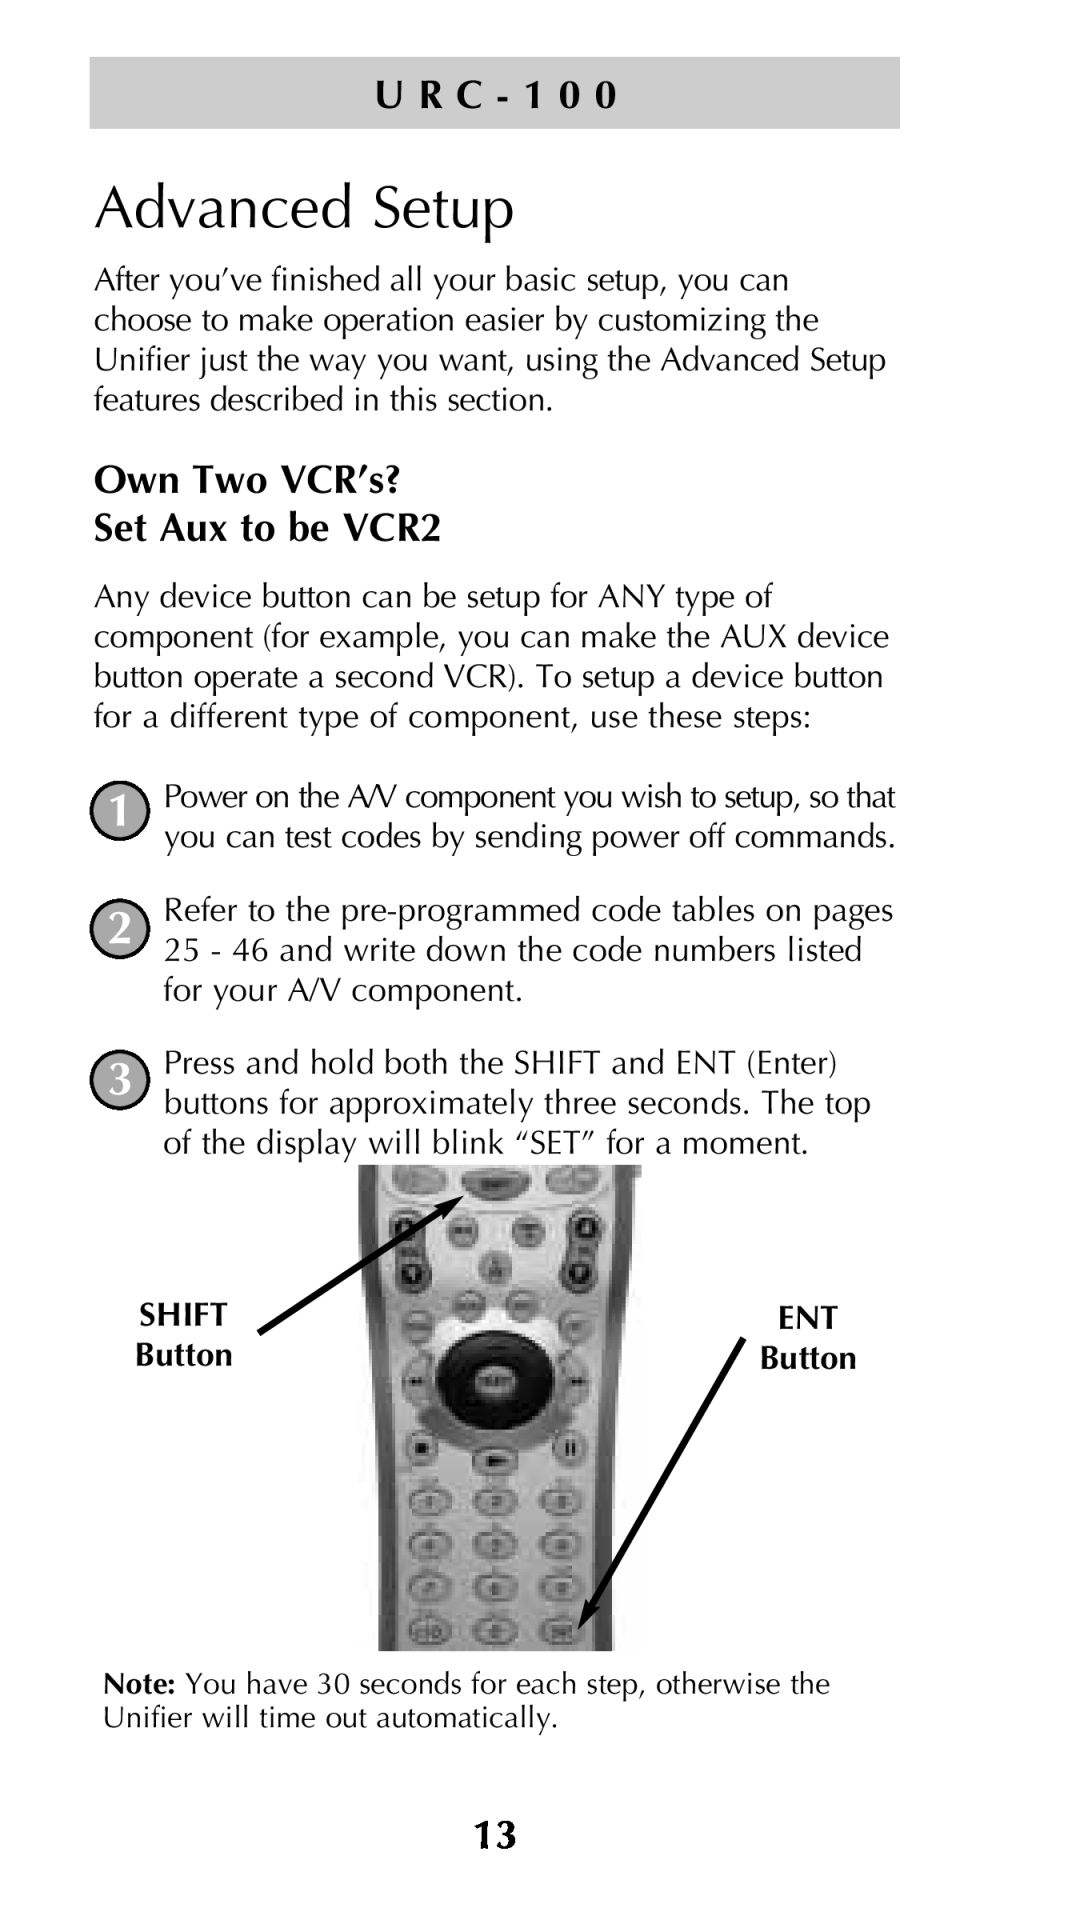 Universal Remote Control Unifier URC-100 owner manual Advanced Setup, Own Two VCR’s? Set Aux to be VCR2, U R C - 1 0 